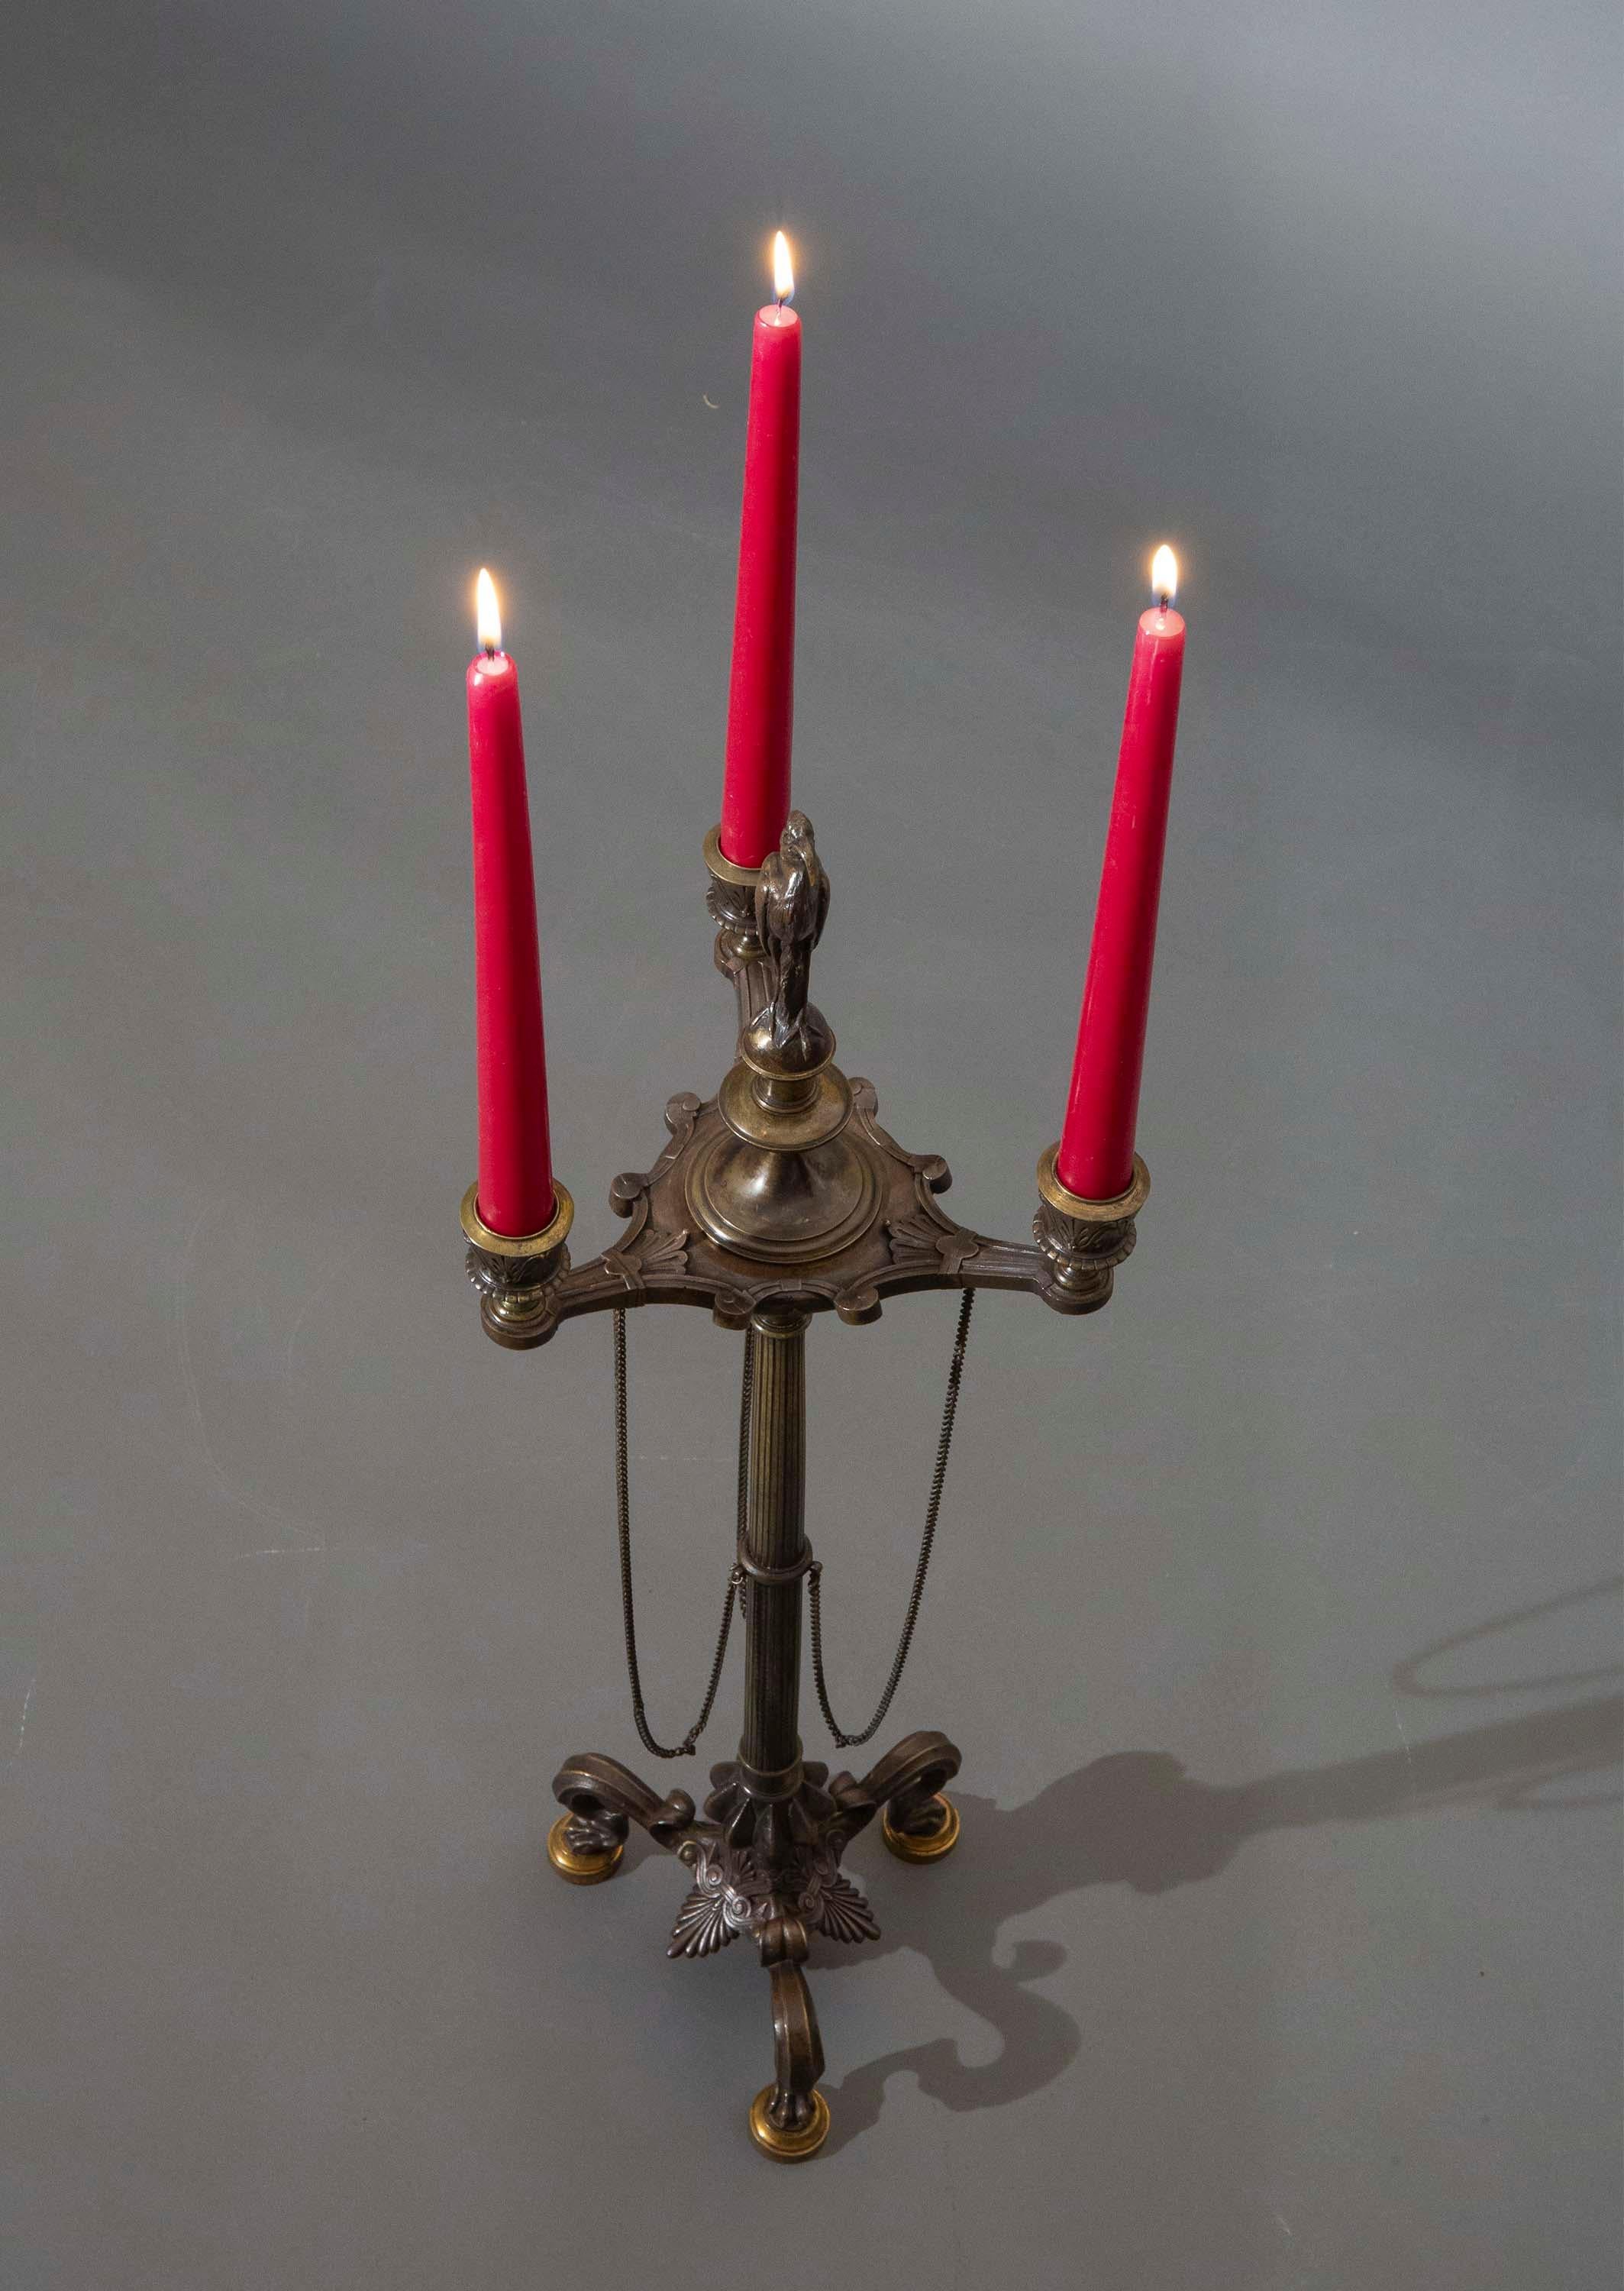 An exquisitely cast and patinated bronze 'Etruscan' candelabrum in the Grand Tour taste.
France or Italy, mid- to late 19th century.

Why we like it
We love the finest quality of casting and patination on this superb candelabrum. The top part,